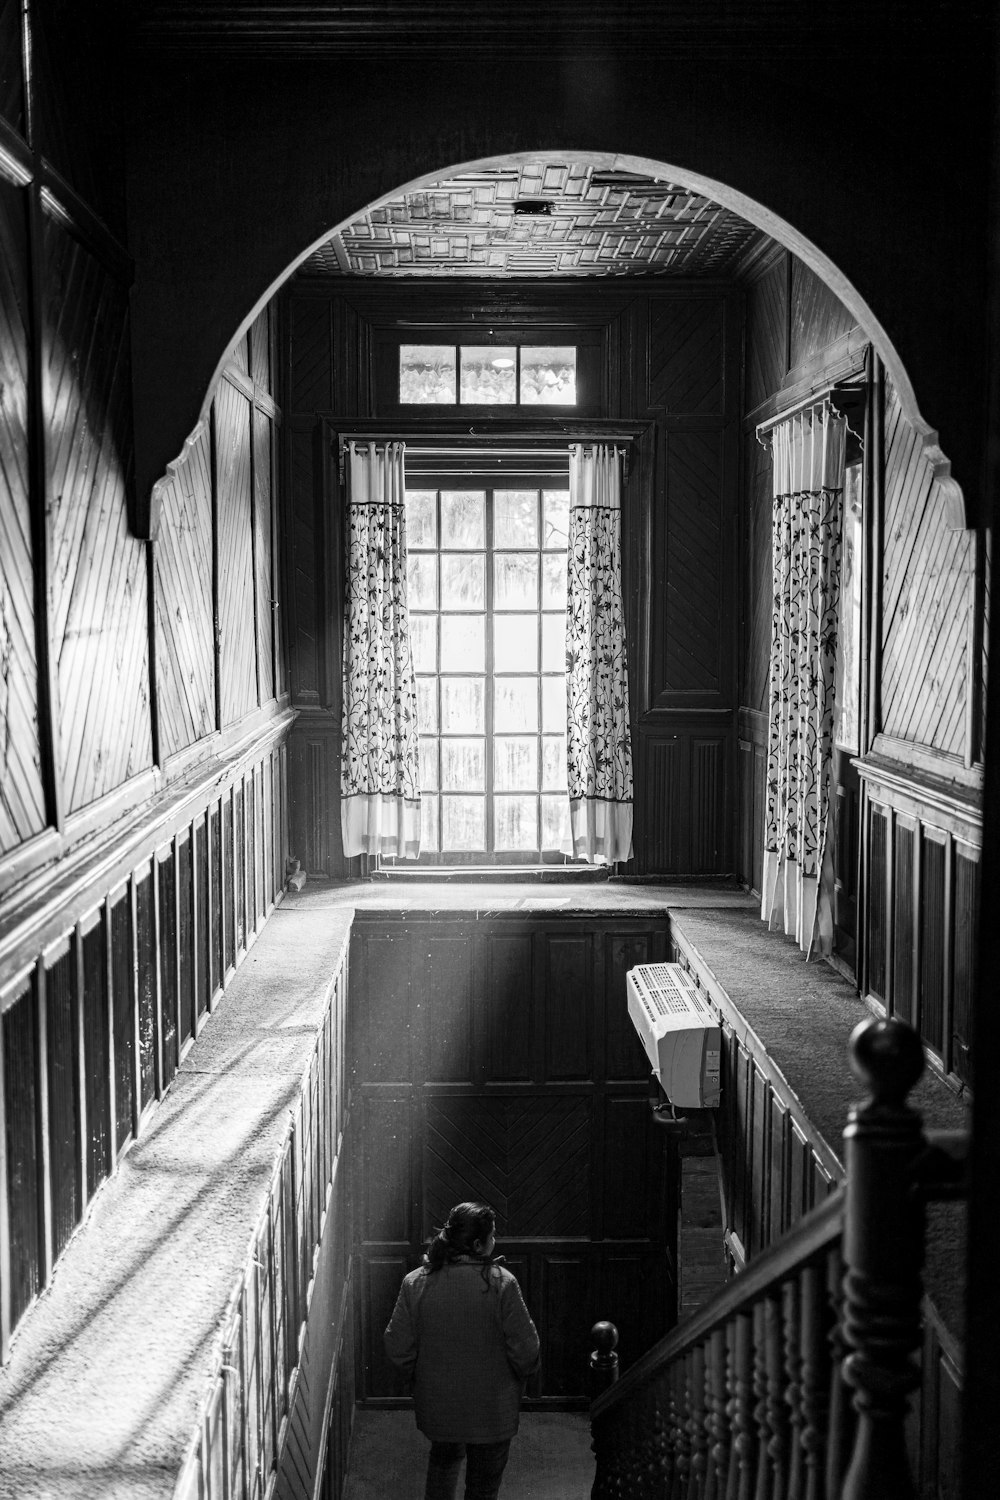 a black and white photo of a person standing in a room